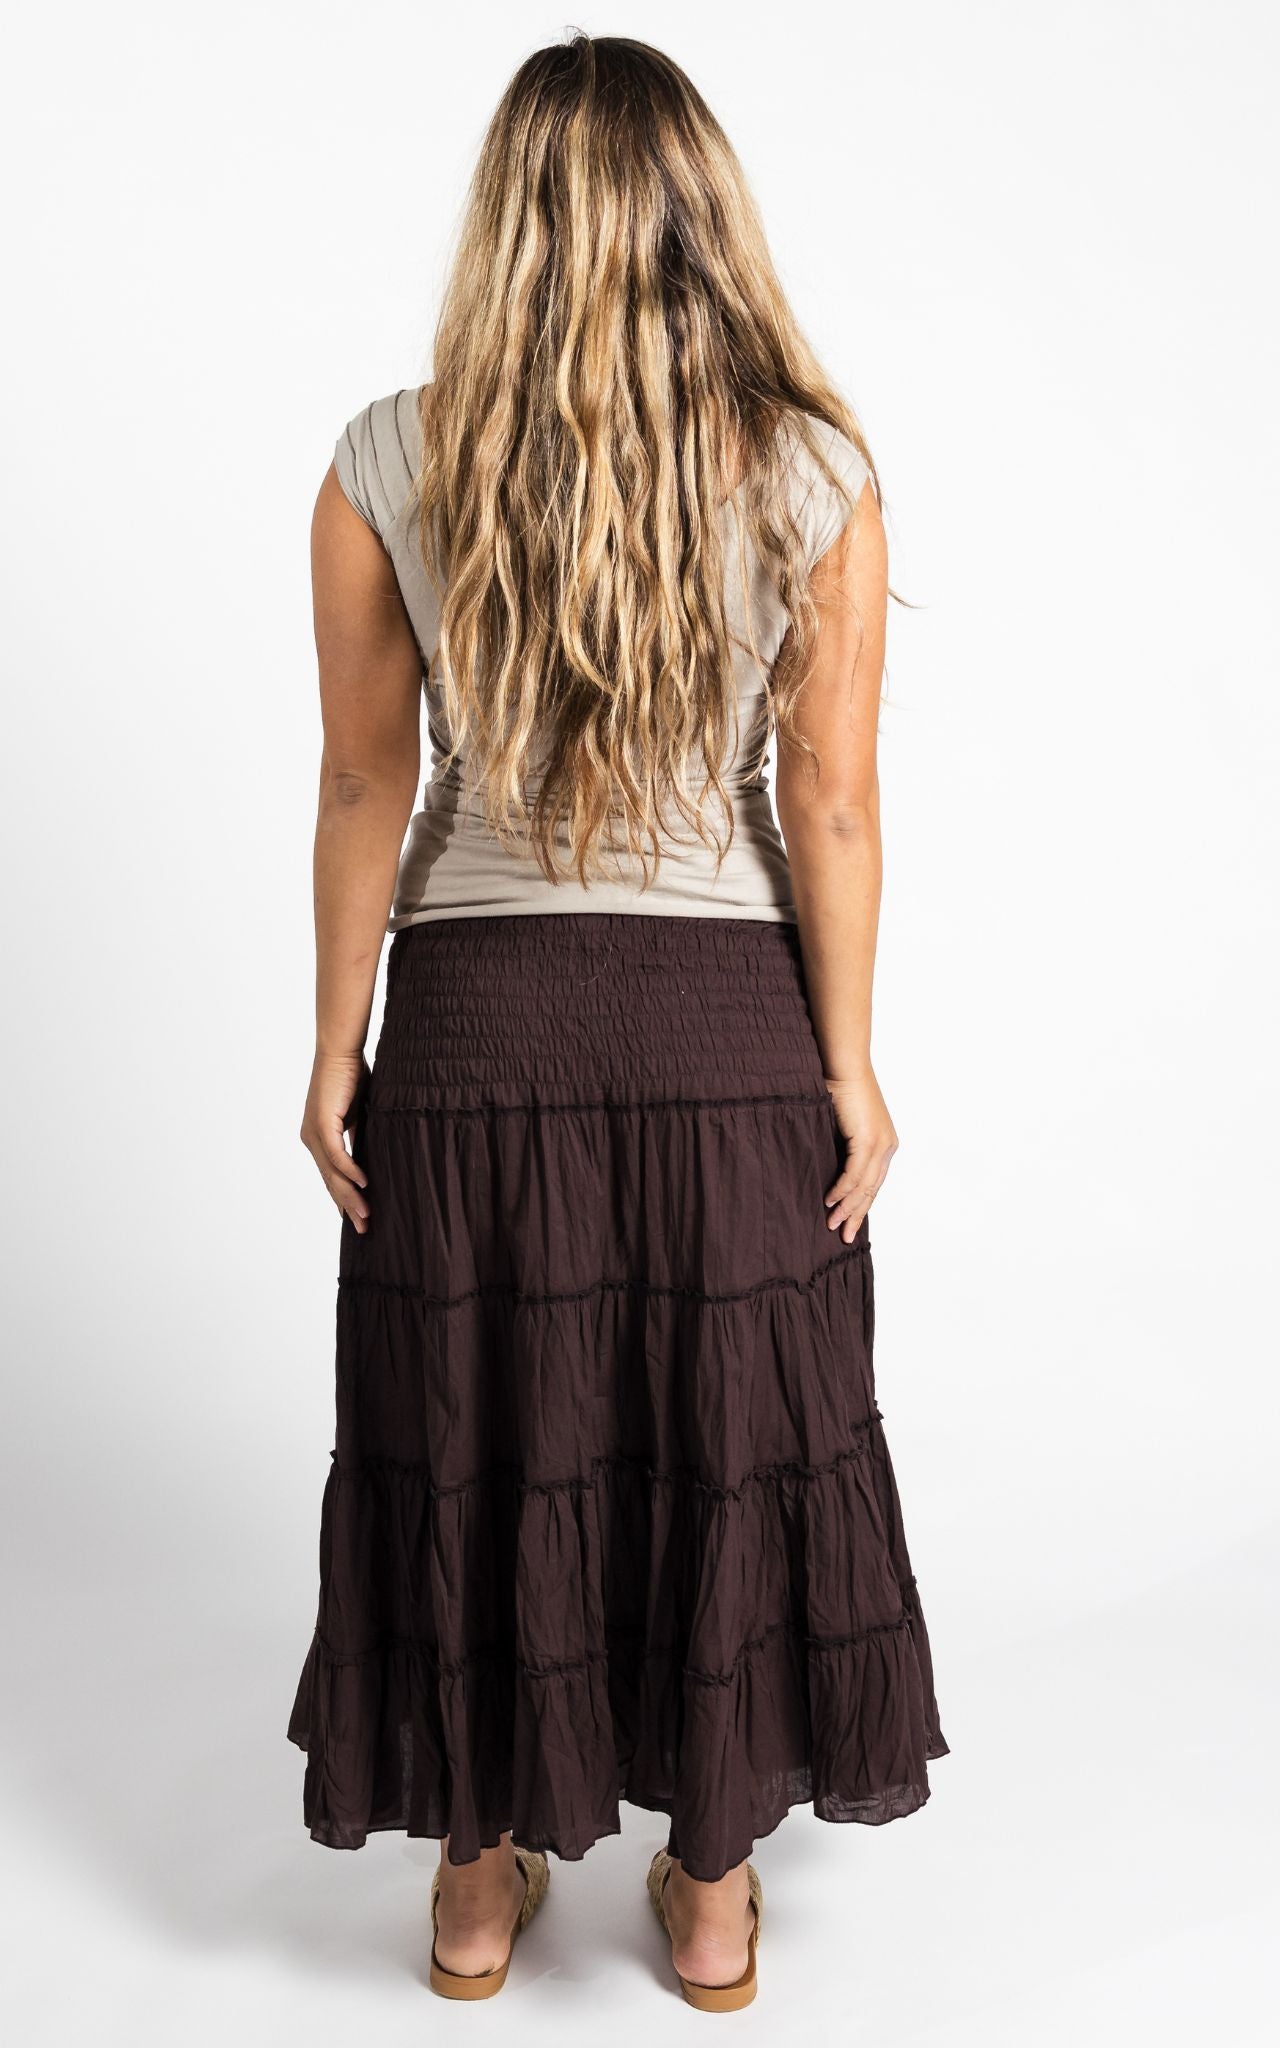 Surya Australia Ethical Cotton 'Franit' Skirt made in Nepal - Chocolate